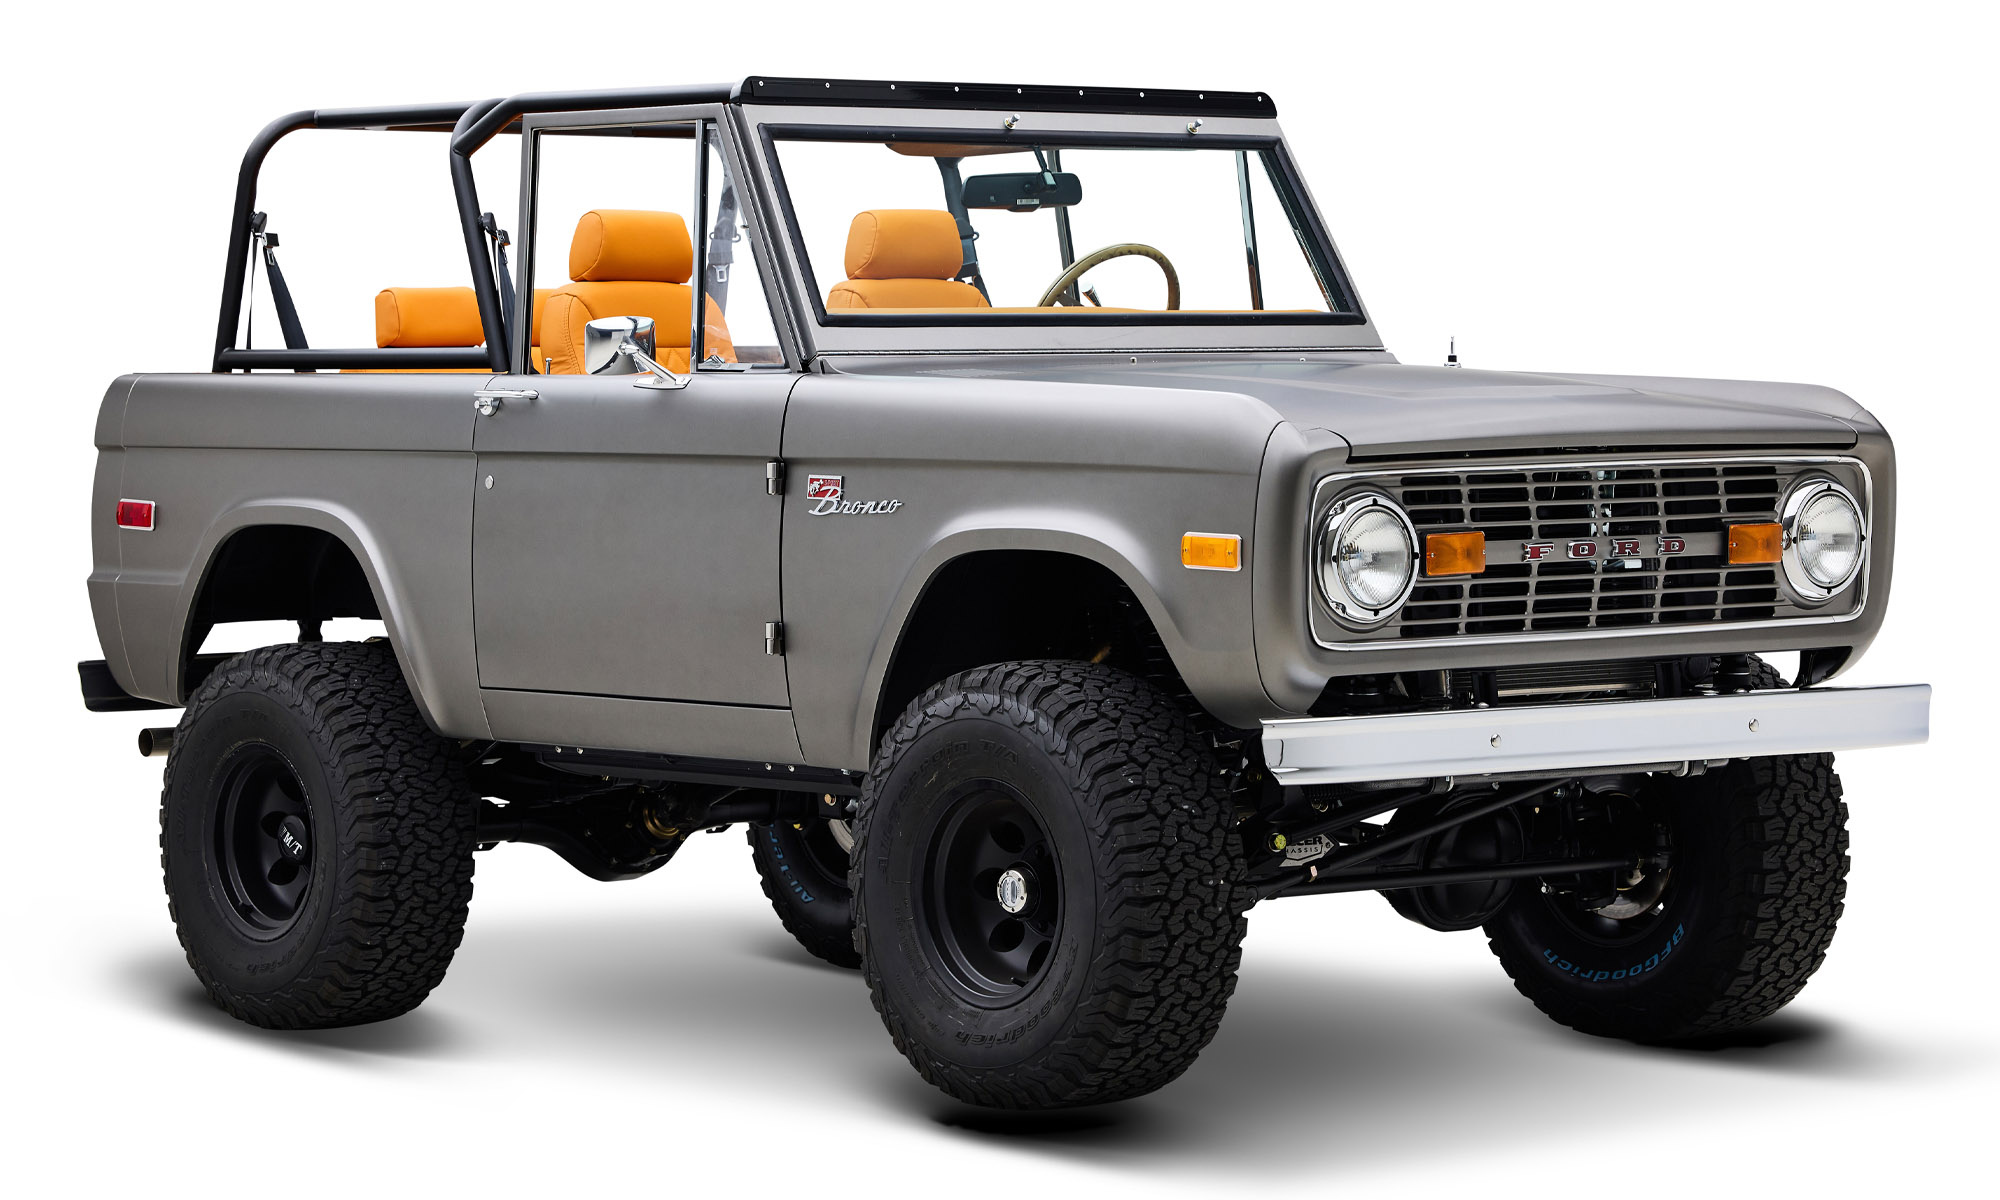 The Dealer Matte Silver Classic Ford Broncos Coyote Series with orange hex custom interior